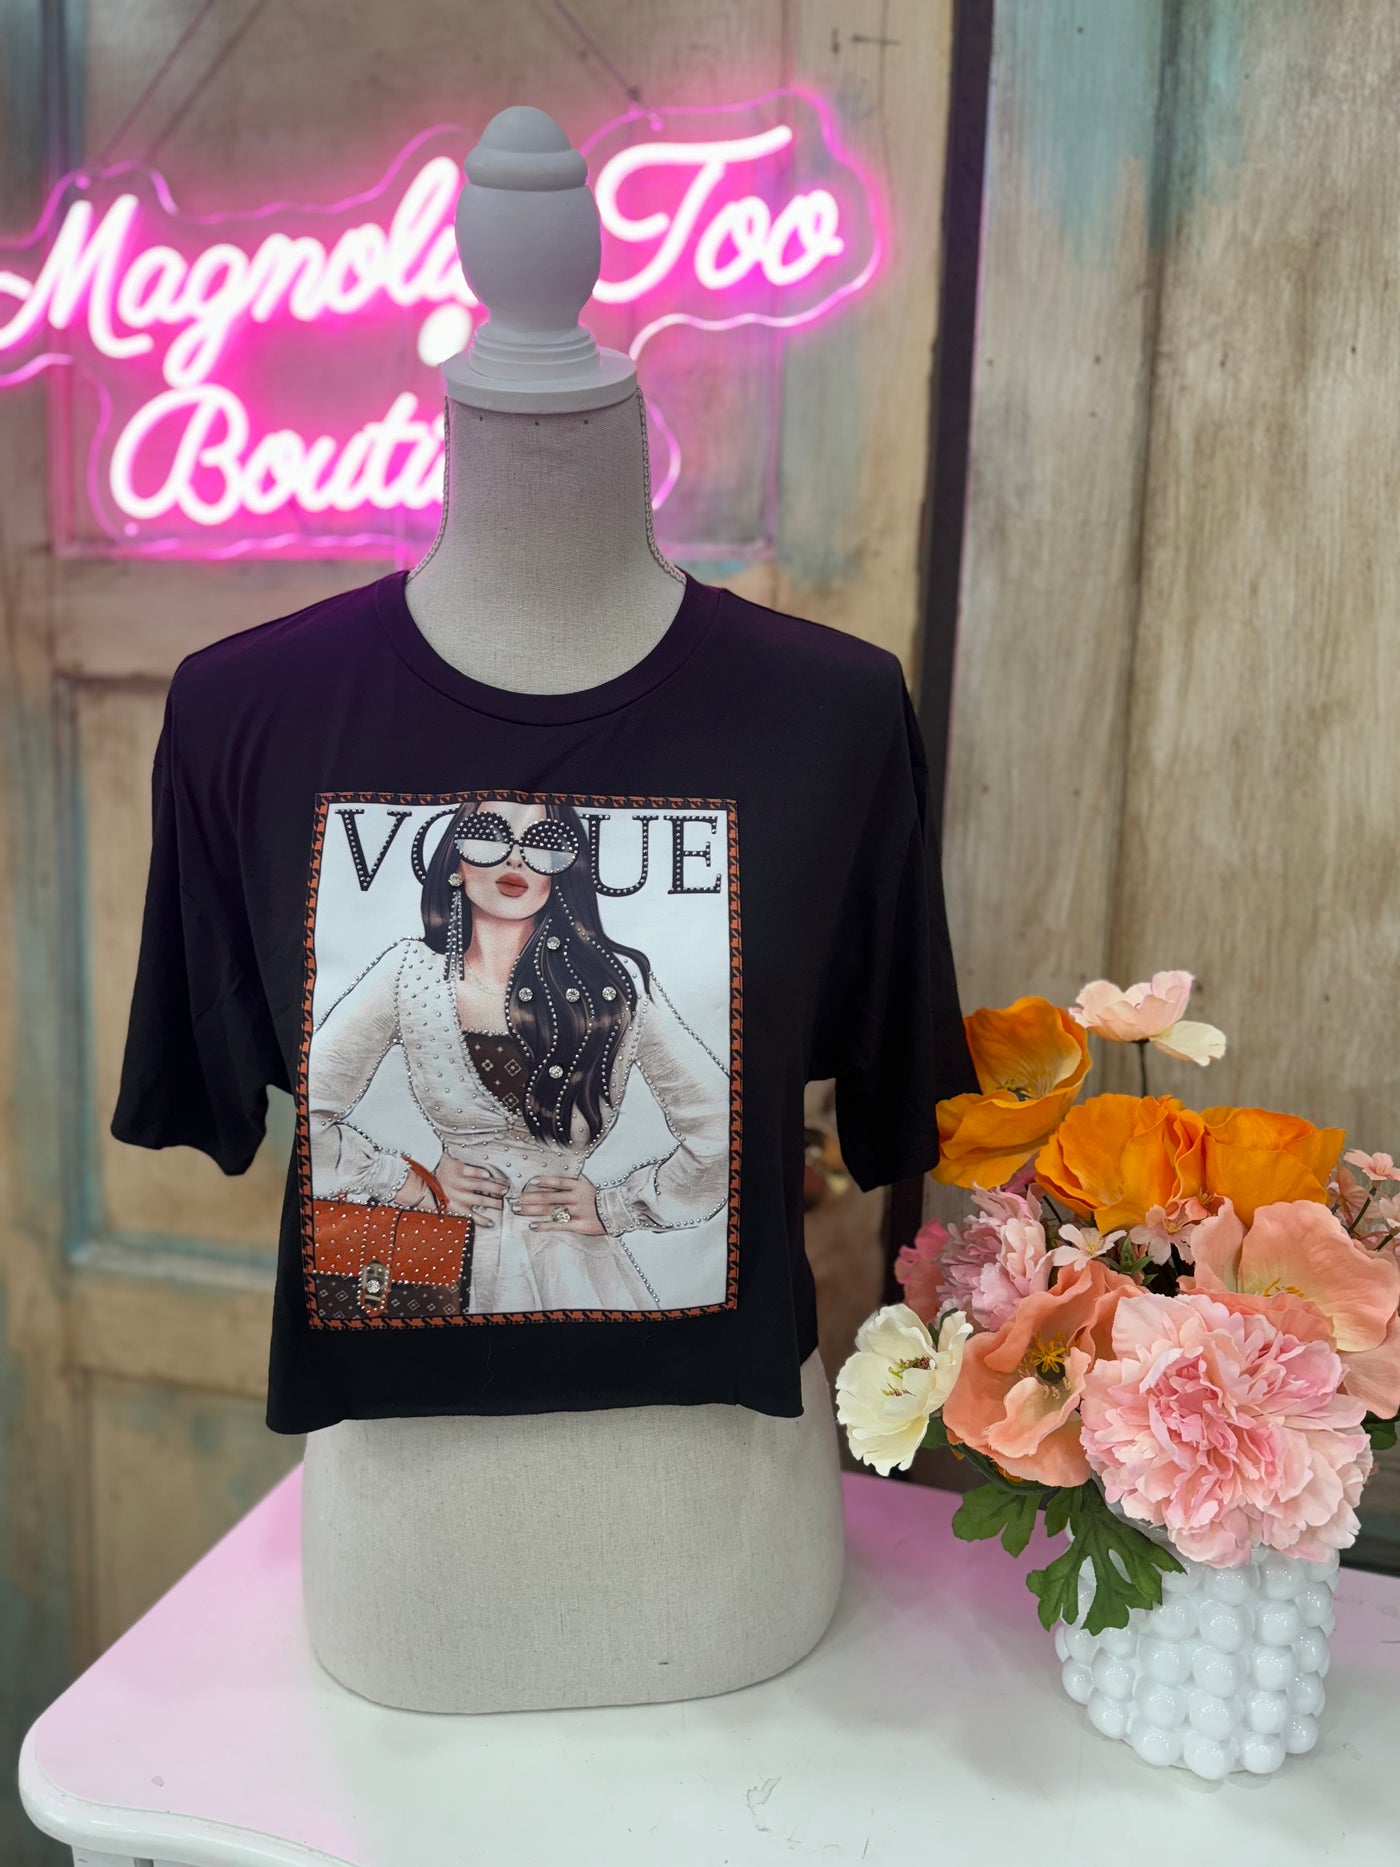 Vogue Girl Cropped Tee w/Purse Patch